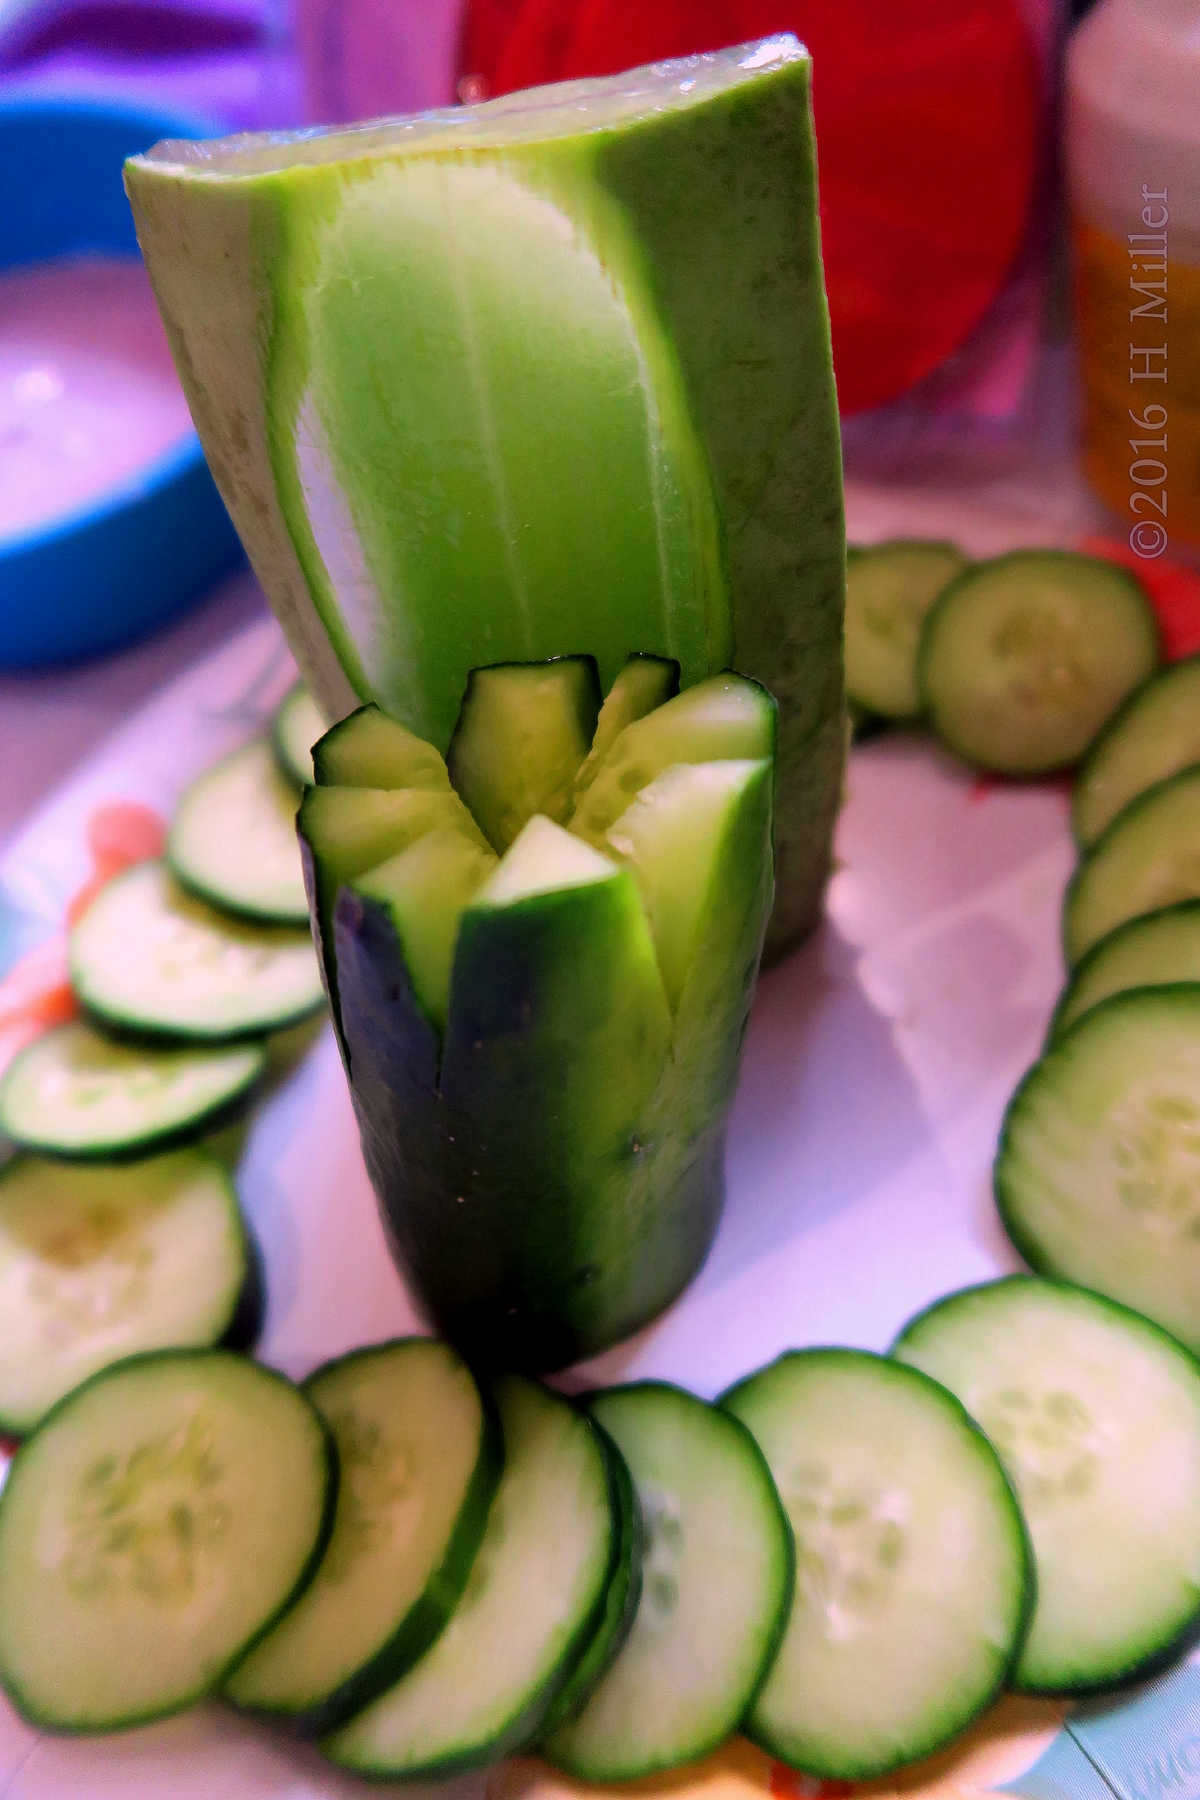 Cucumber Slices For Kids Facial Relaxation! 